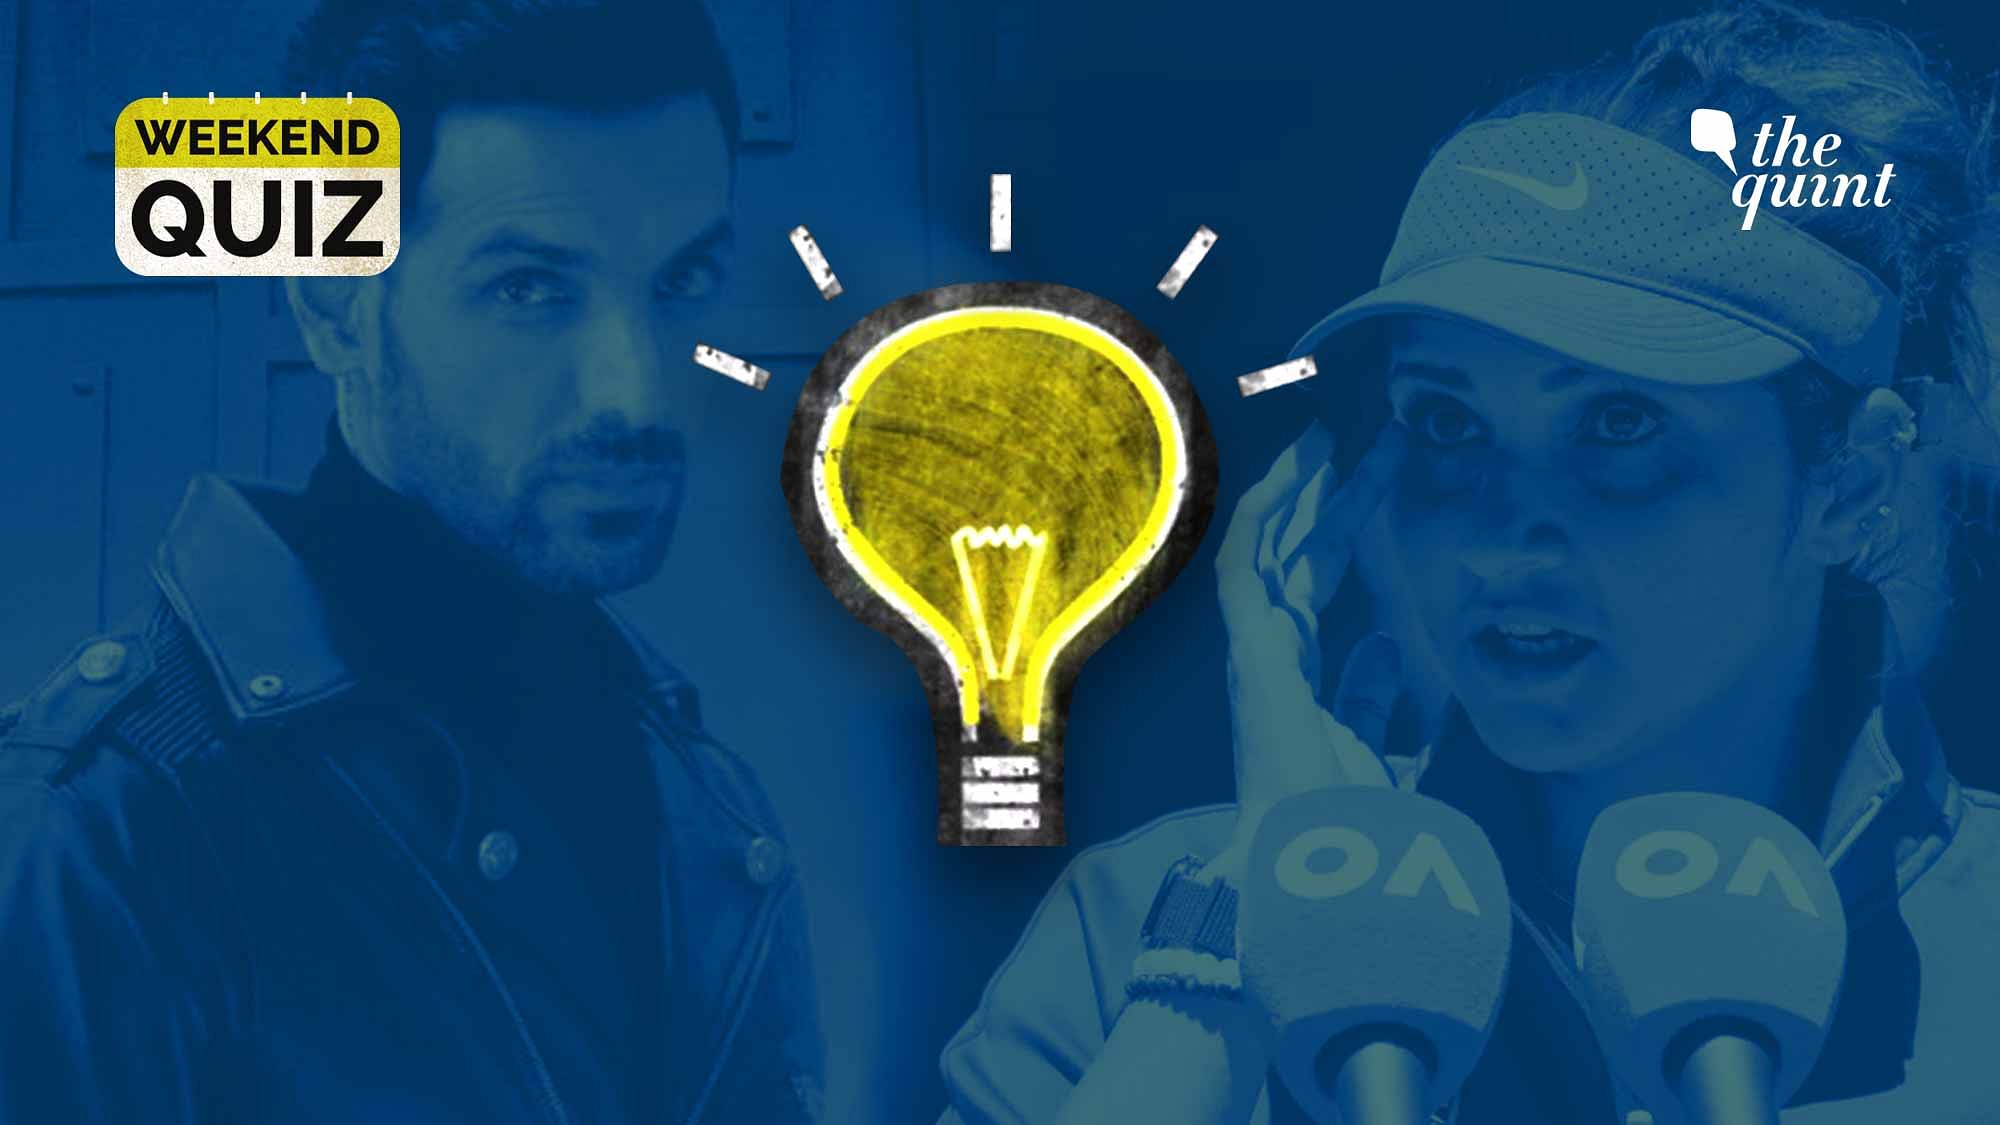 <div class="paragraphs"><p>From Sania Mirza to John Abraham, have you been tracking the news this week? Take <strong>The Quint</strong>'s weekend quiz to find out how up-to-date you are.</p></div>